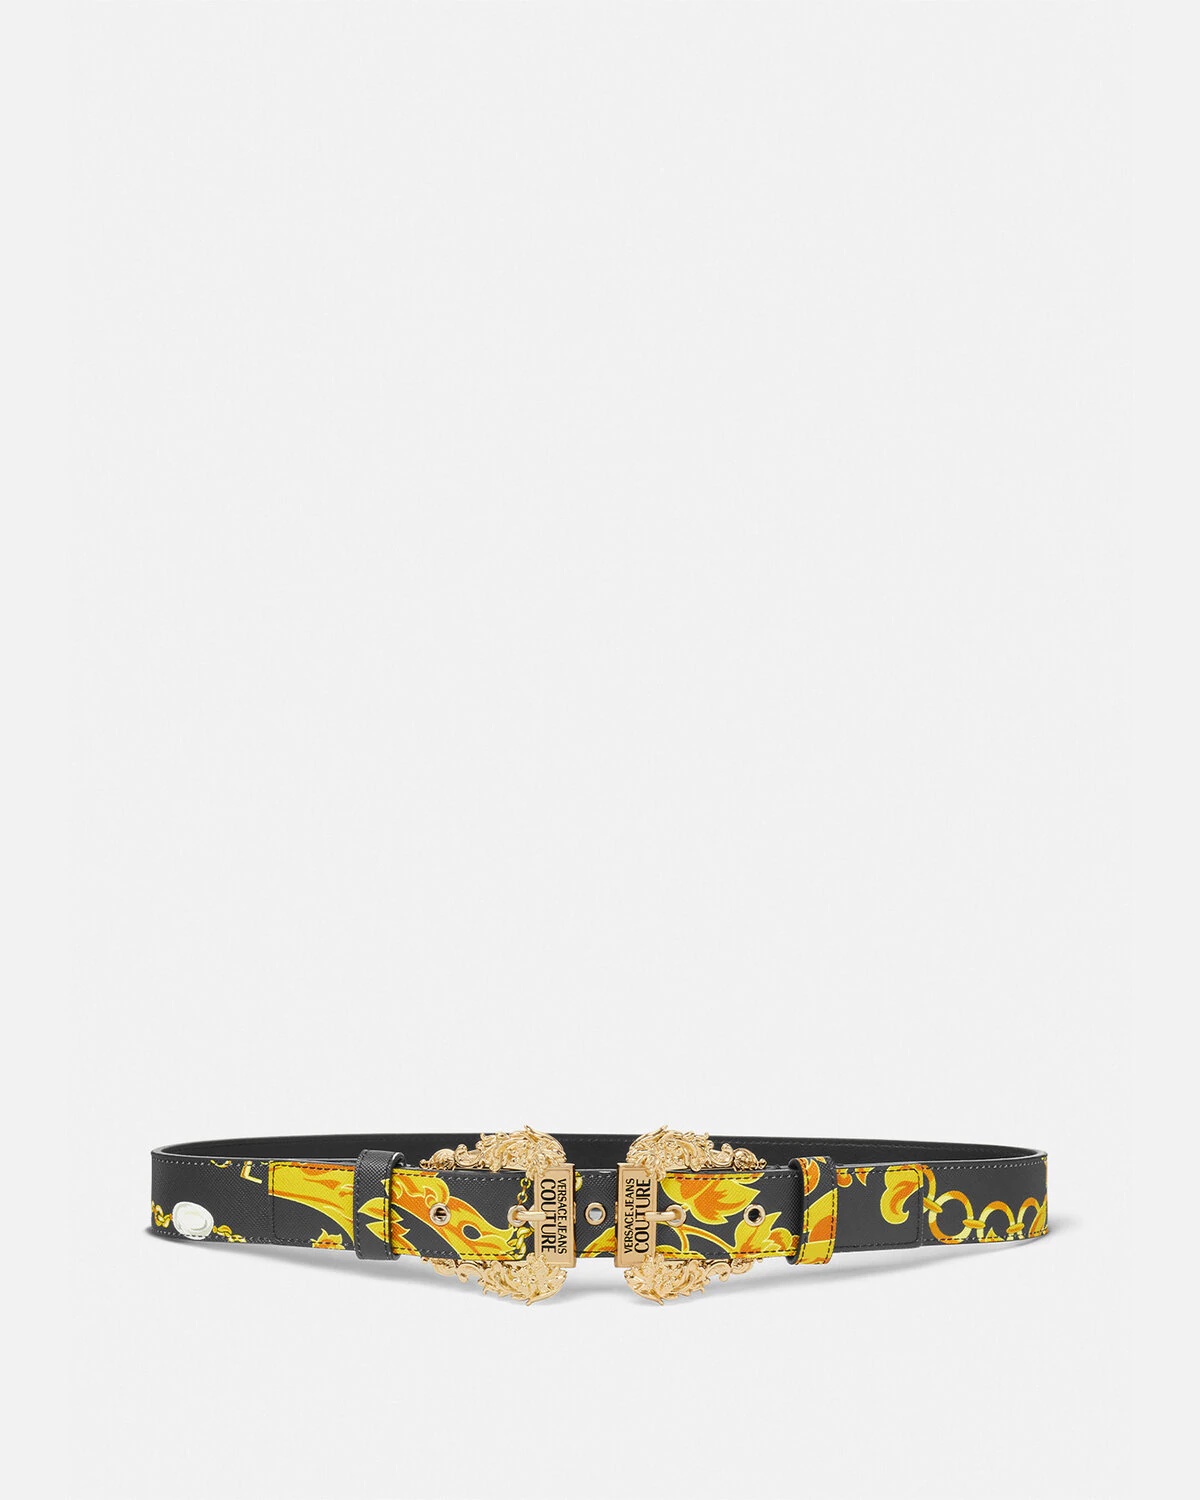 Chain Couture Couture1 Belt - 1